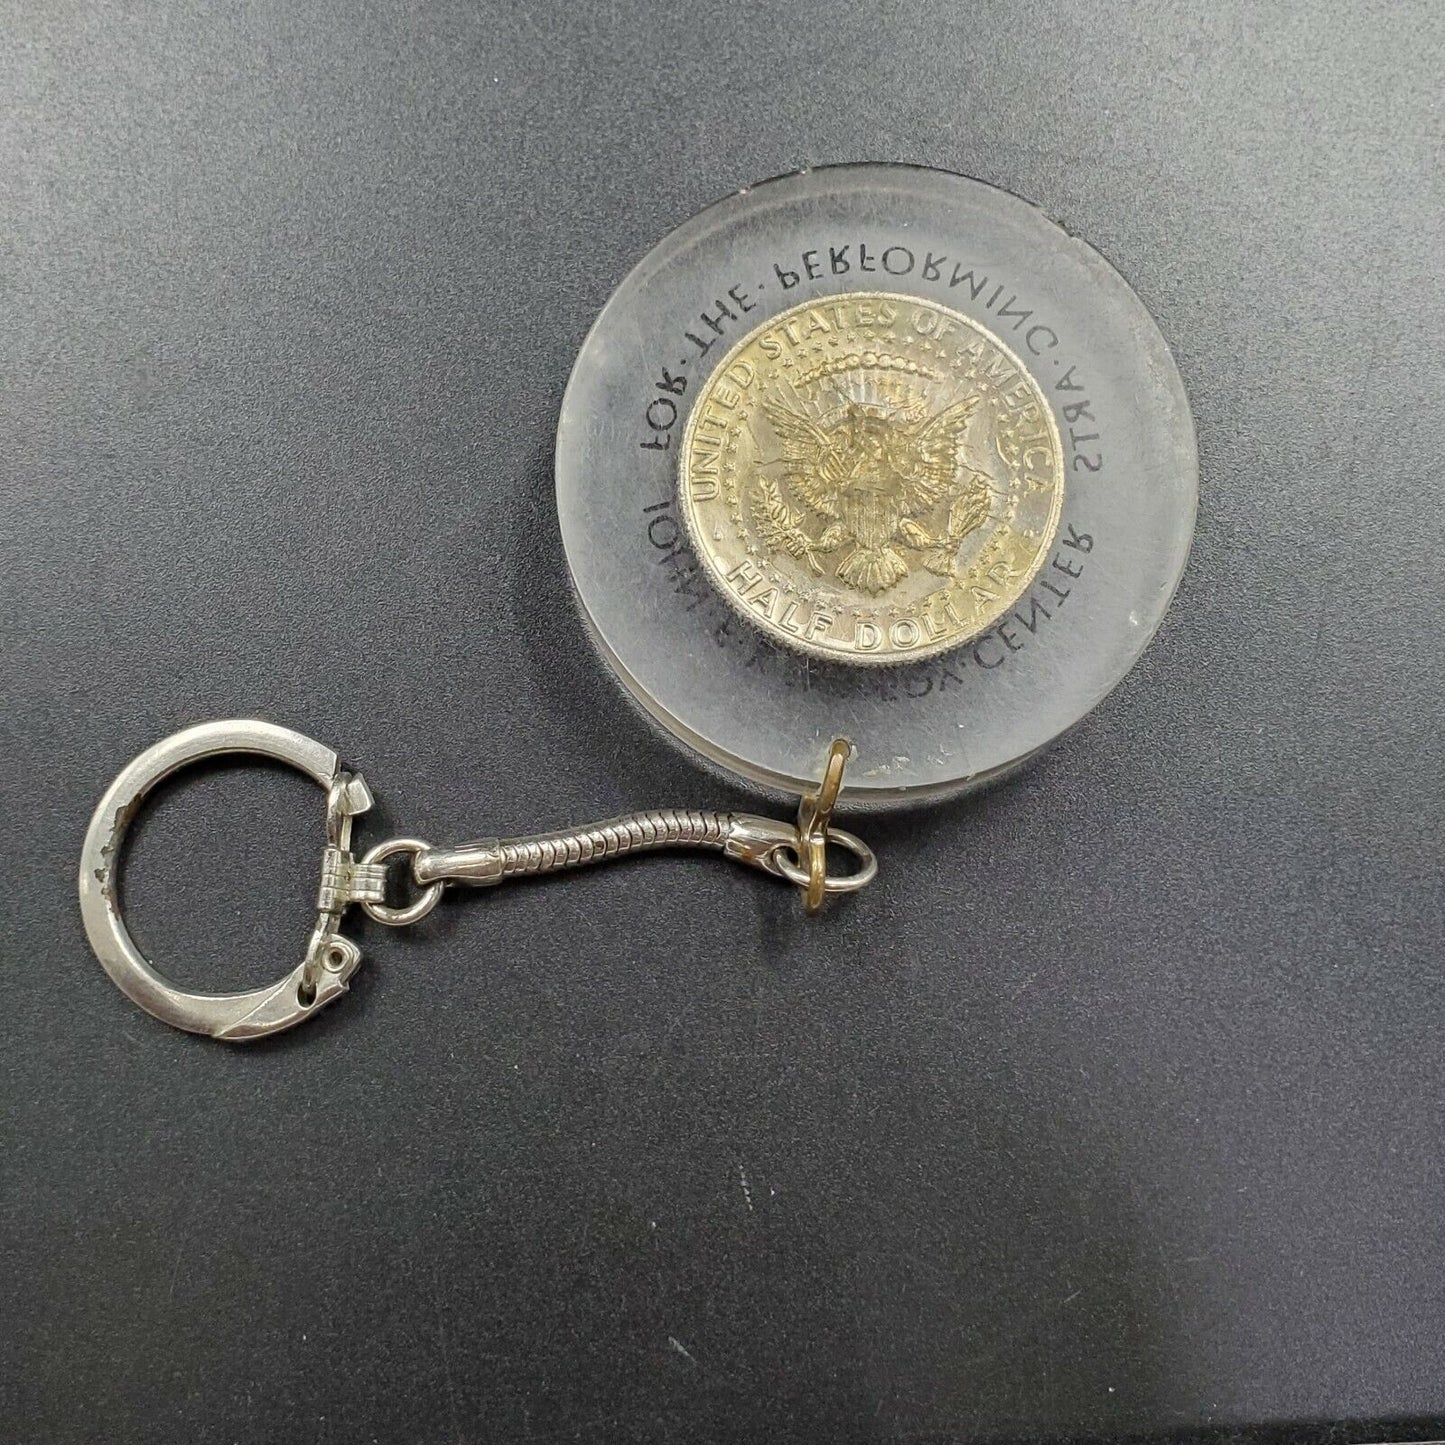 Retro Kennedy Performing Arts Center Gift Shop Key chain with 1973 D Half Dollar